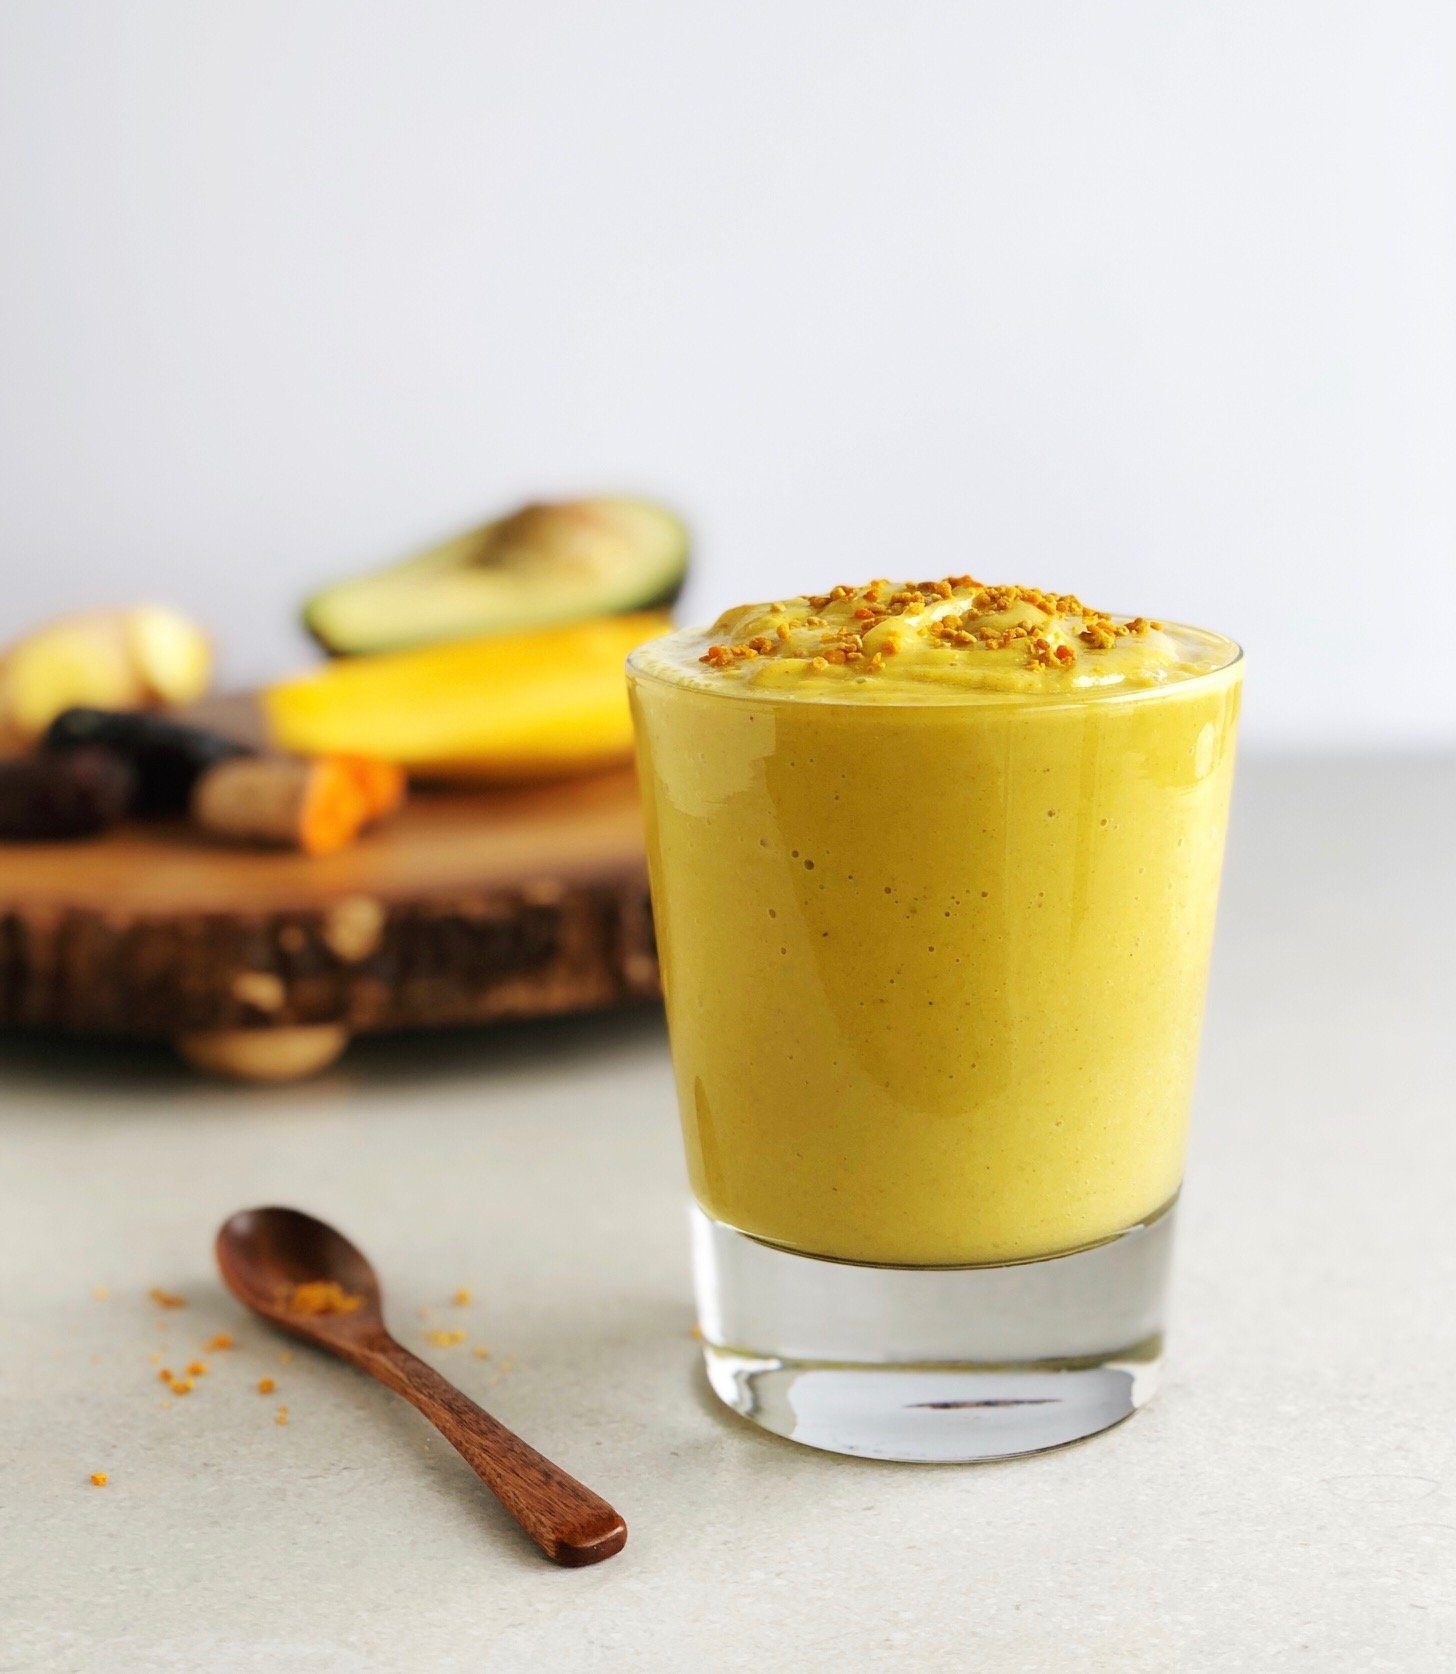 Mango, turmeric and ginger smoothie made with JOYÀ Glow turmeric elixir blend